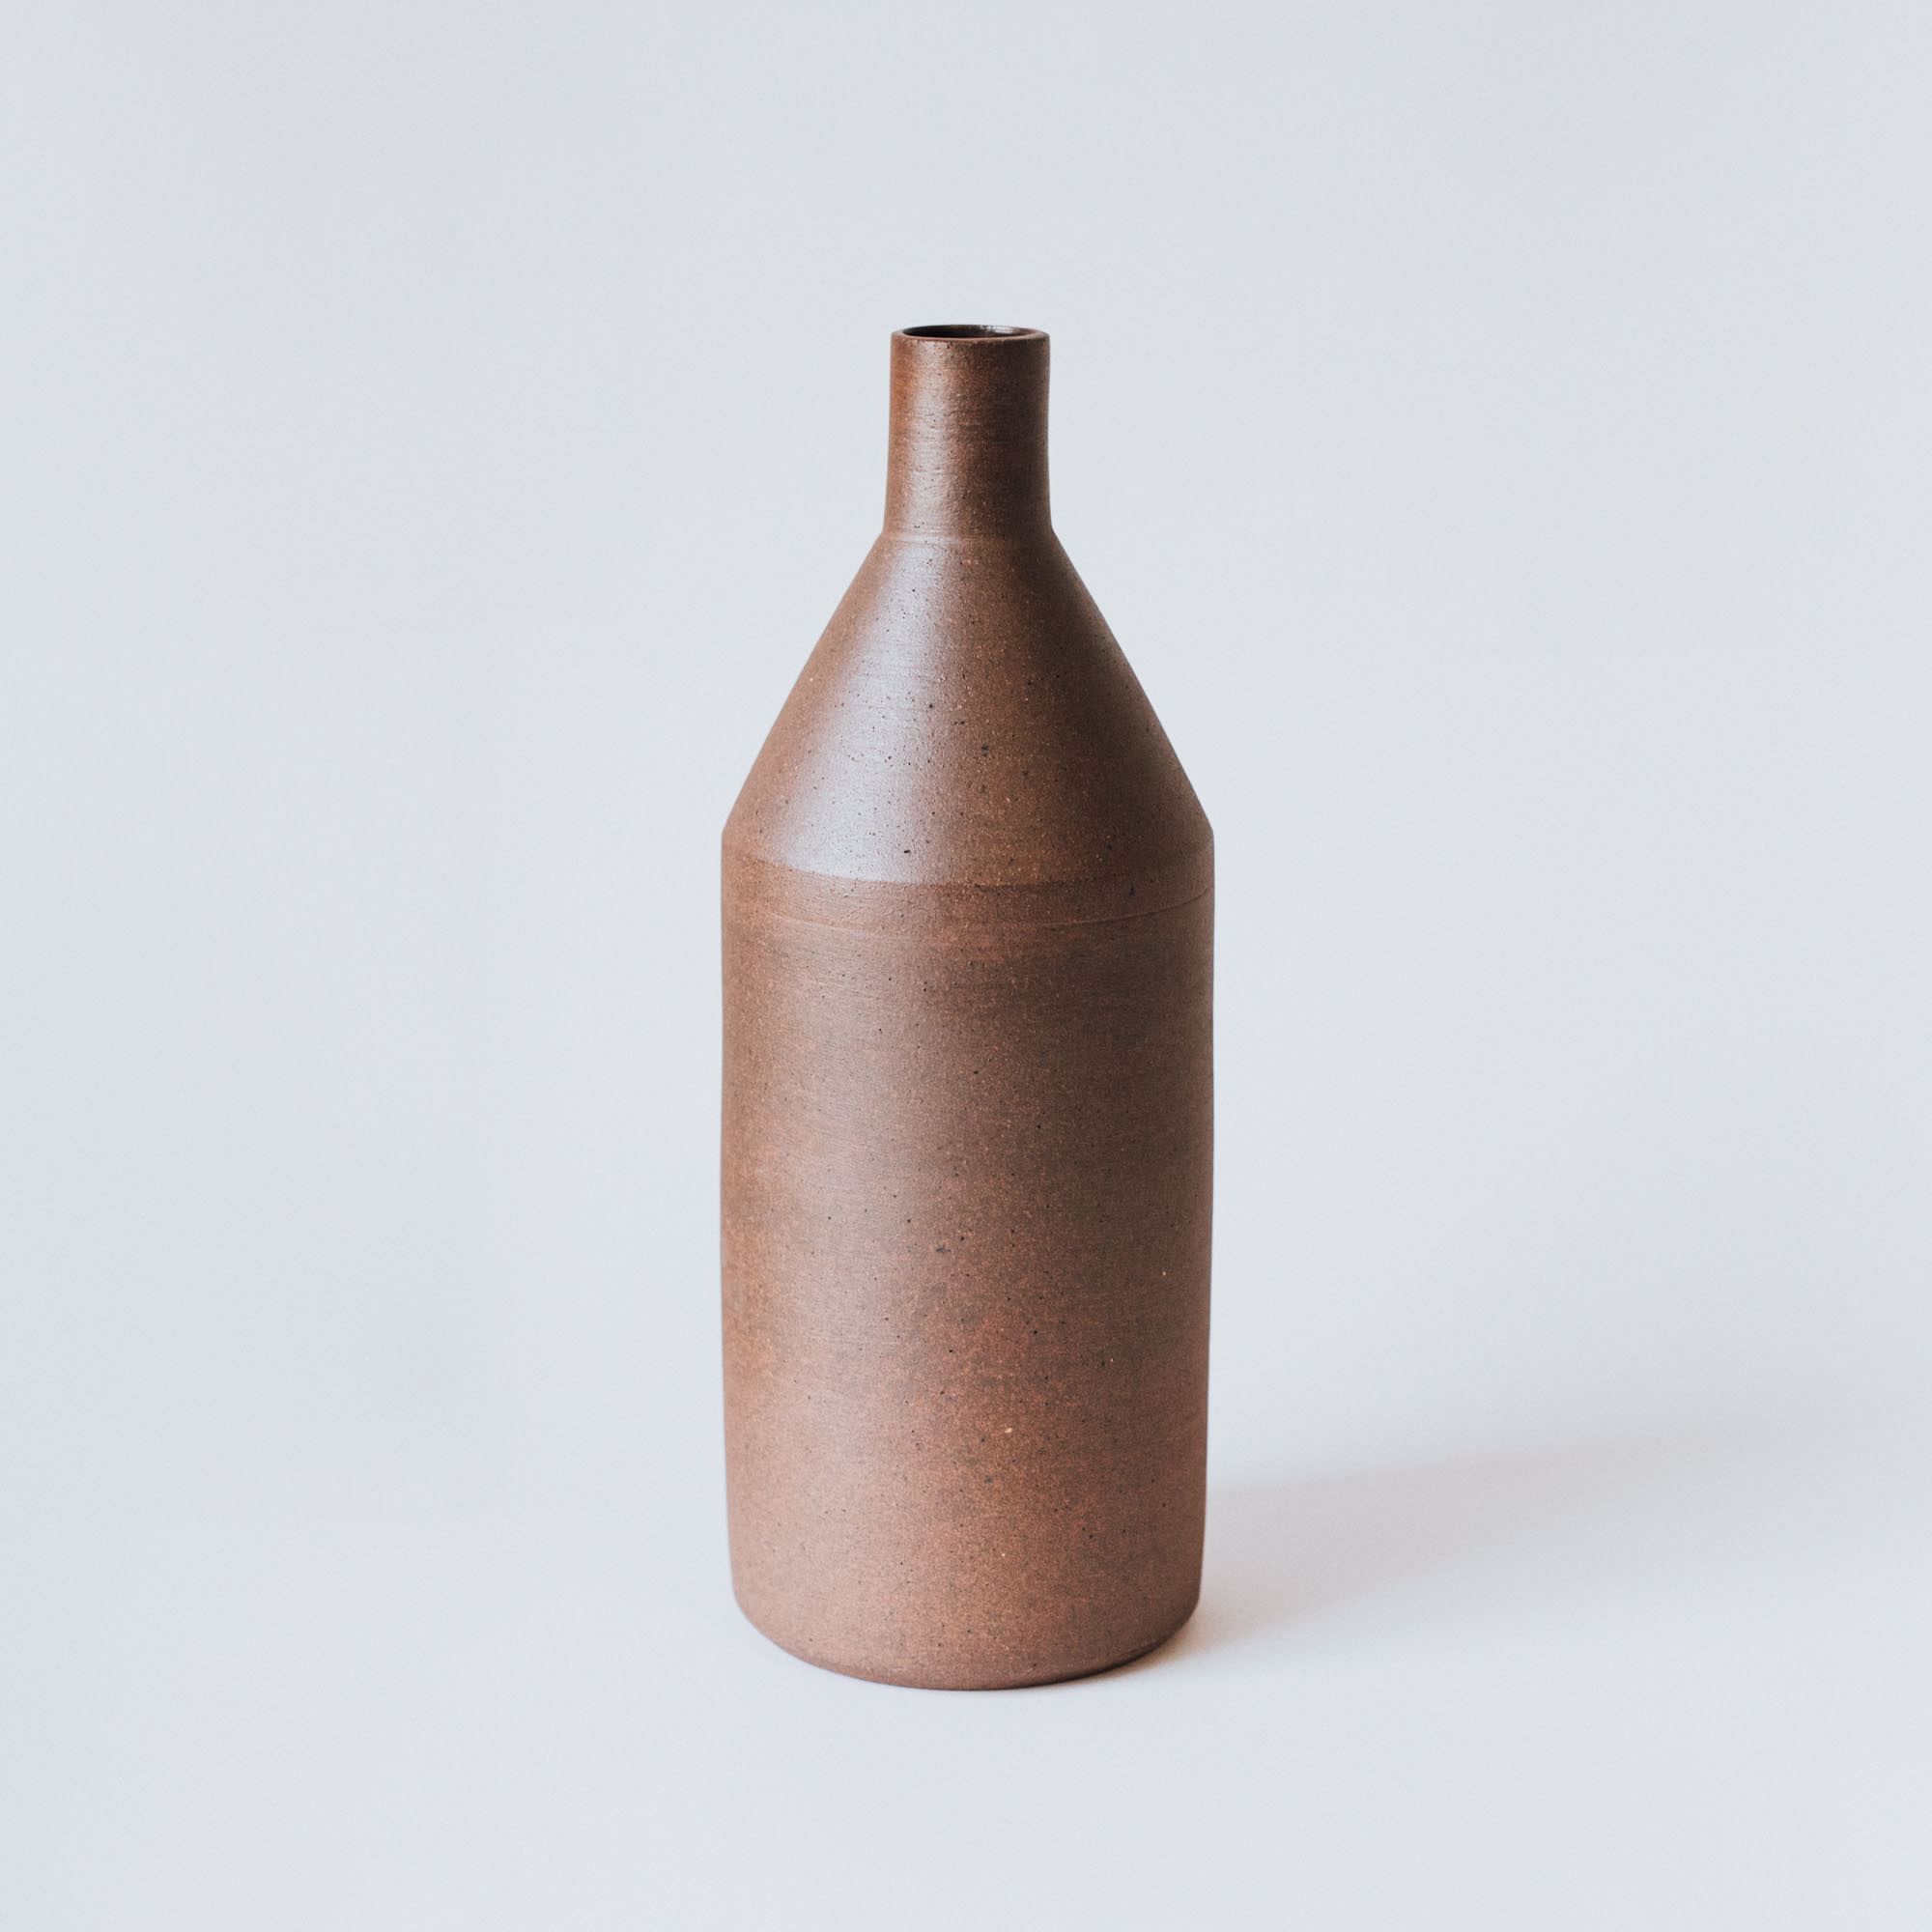 Mexican Handcrafted Ceramic Vase